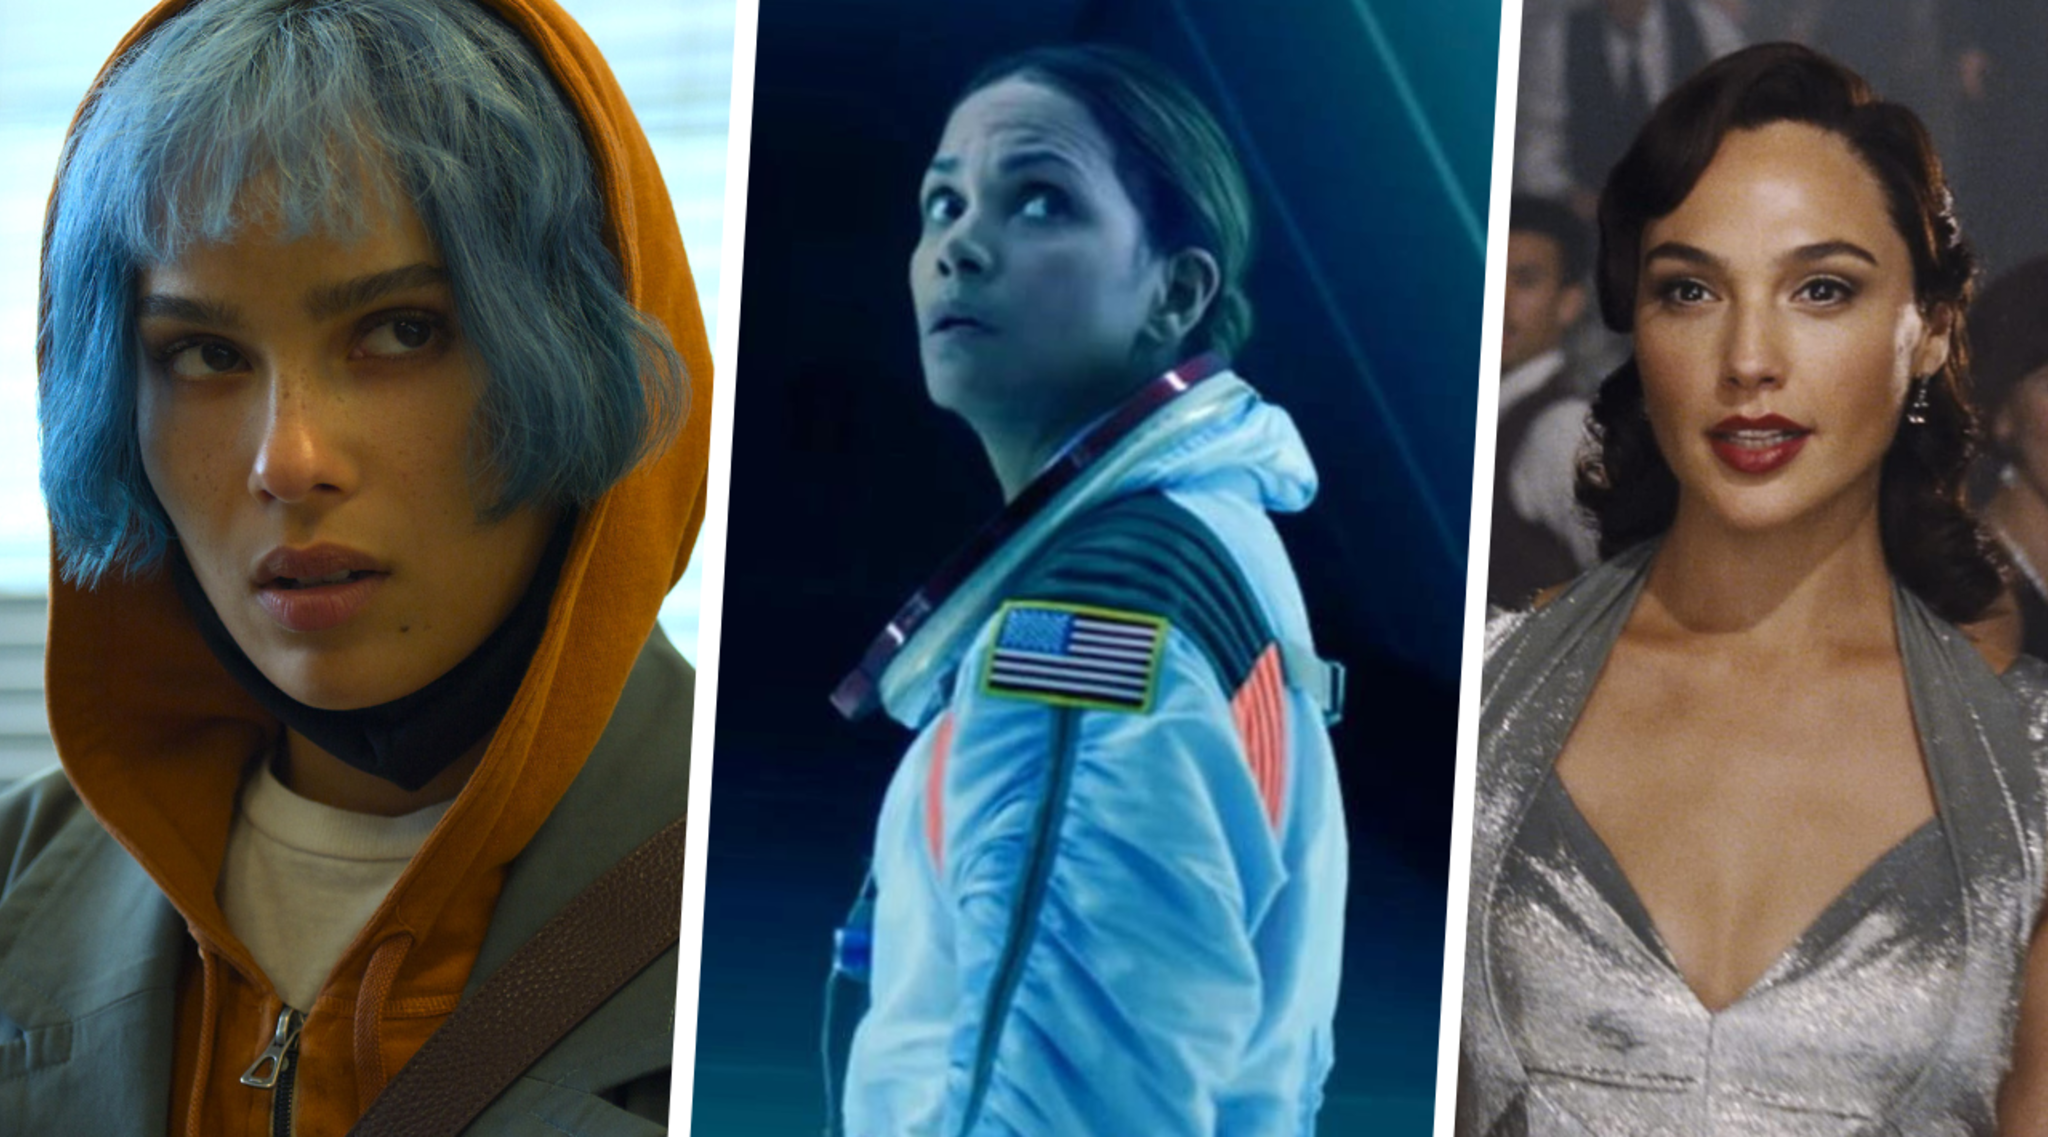 What to Watch: February 2022 Movie Releases